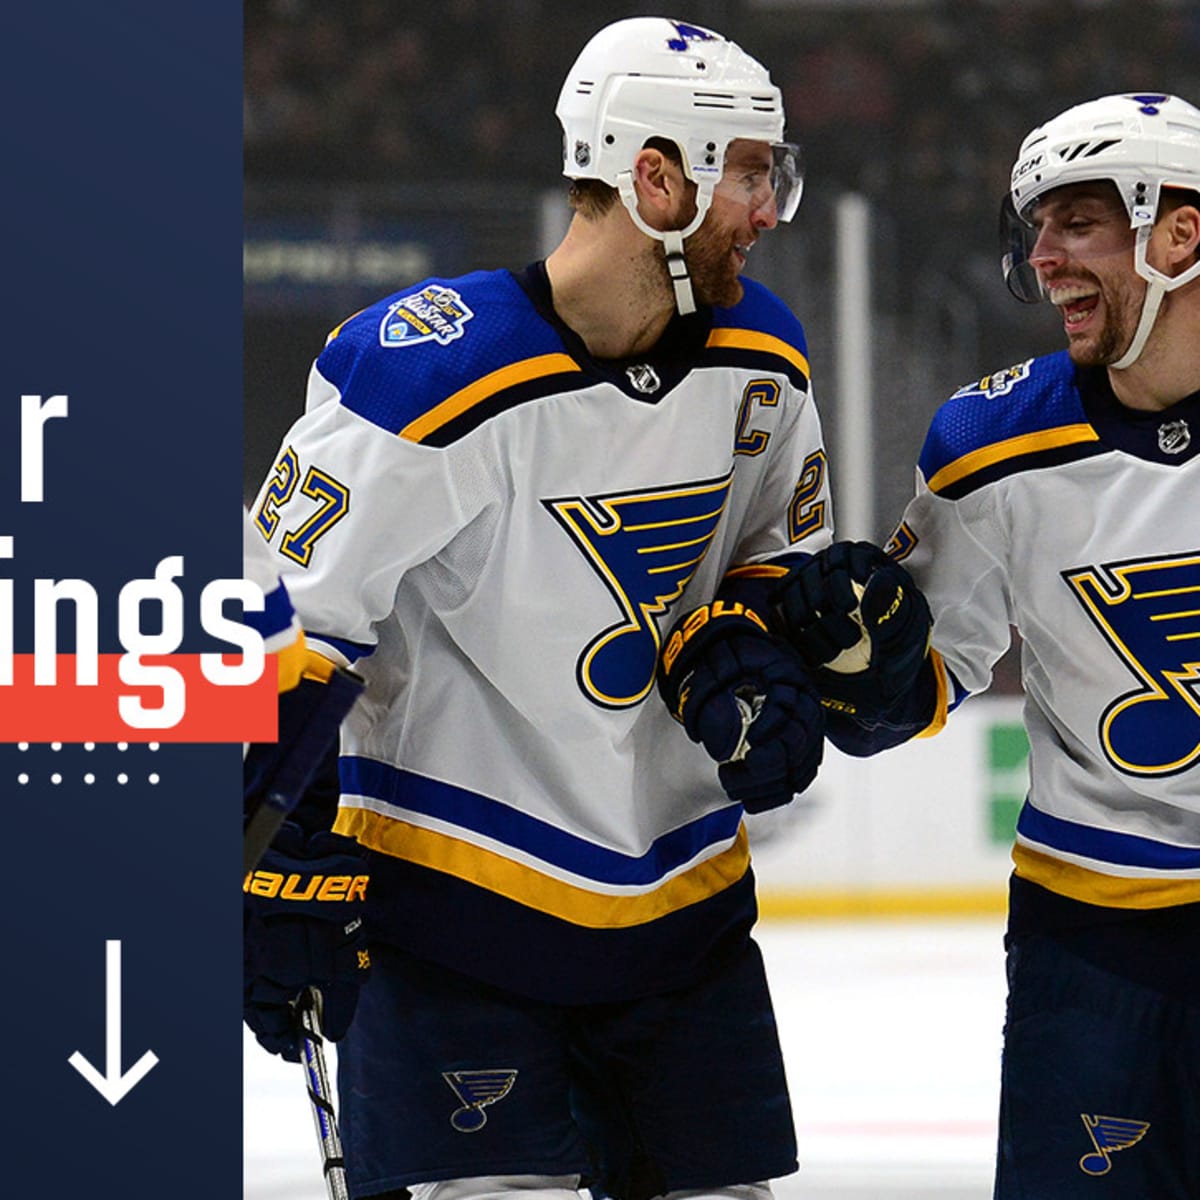 NHL power rankings: Kraken fall back and a new No. 1 emerges